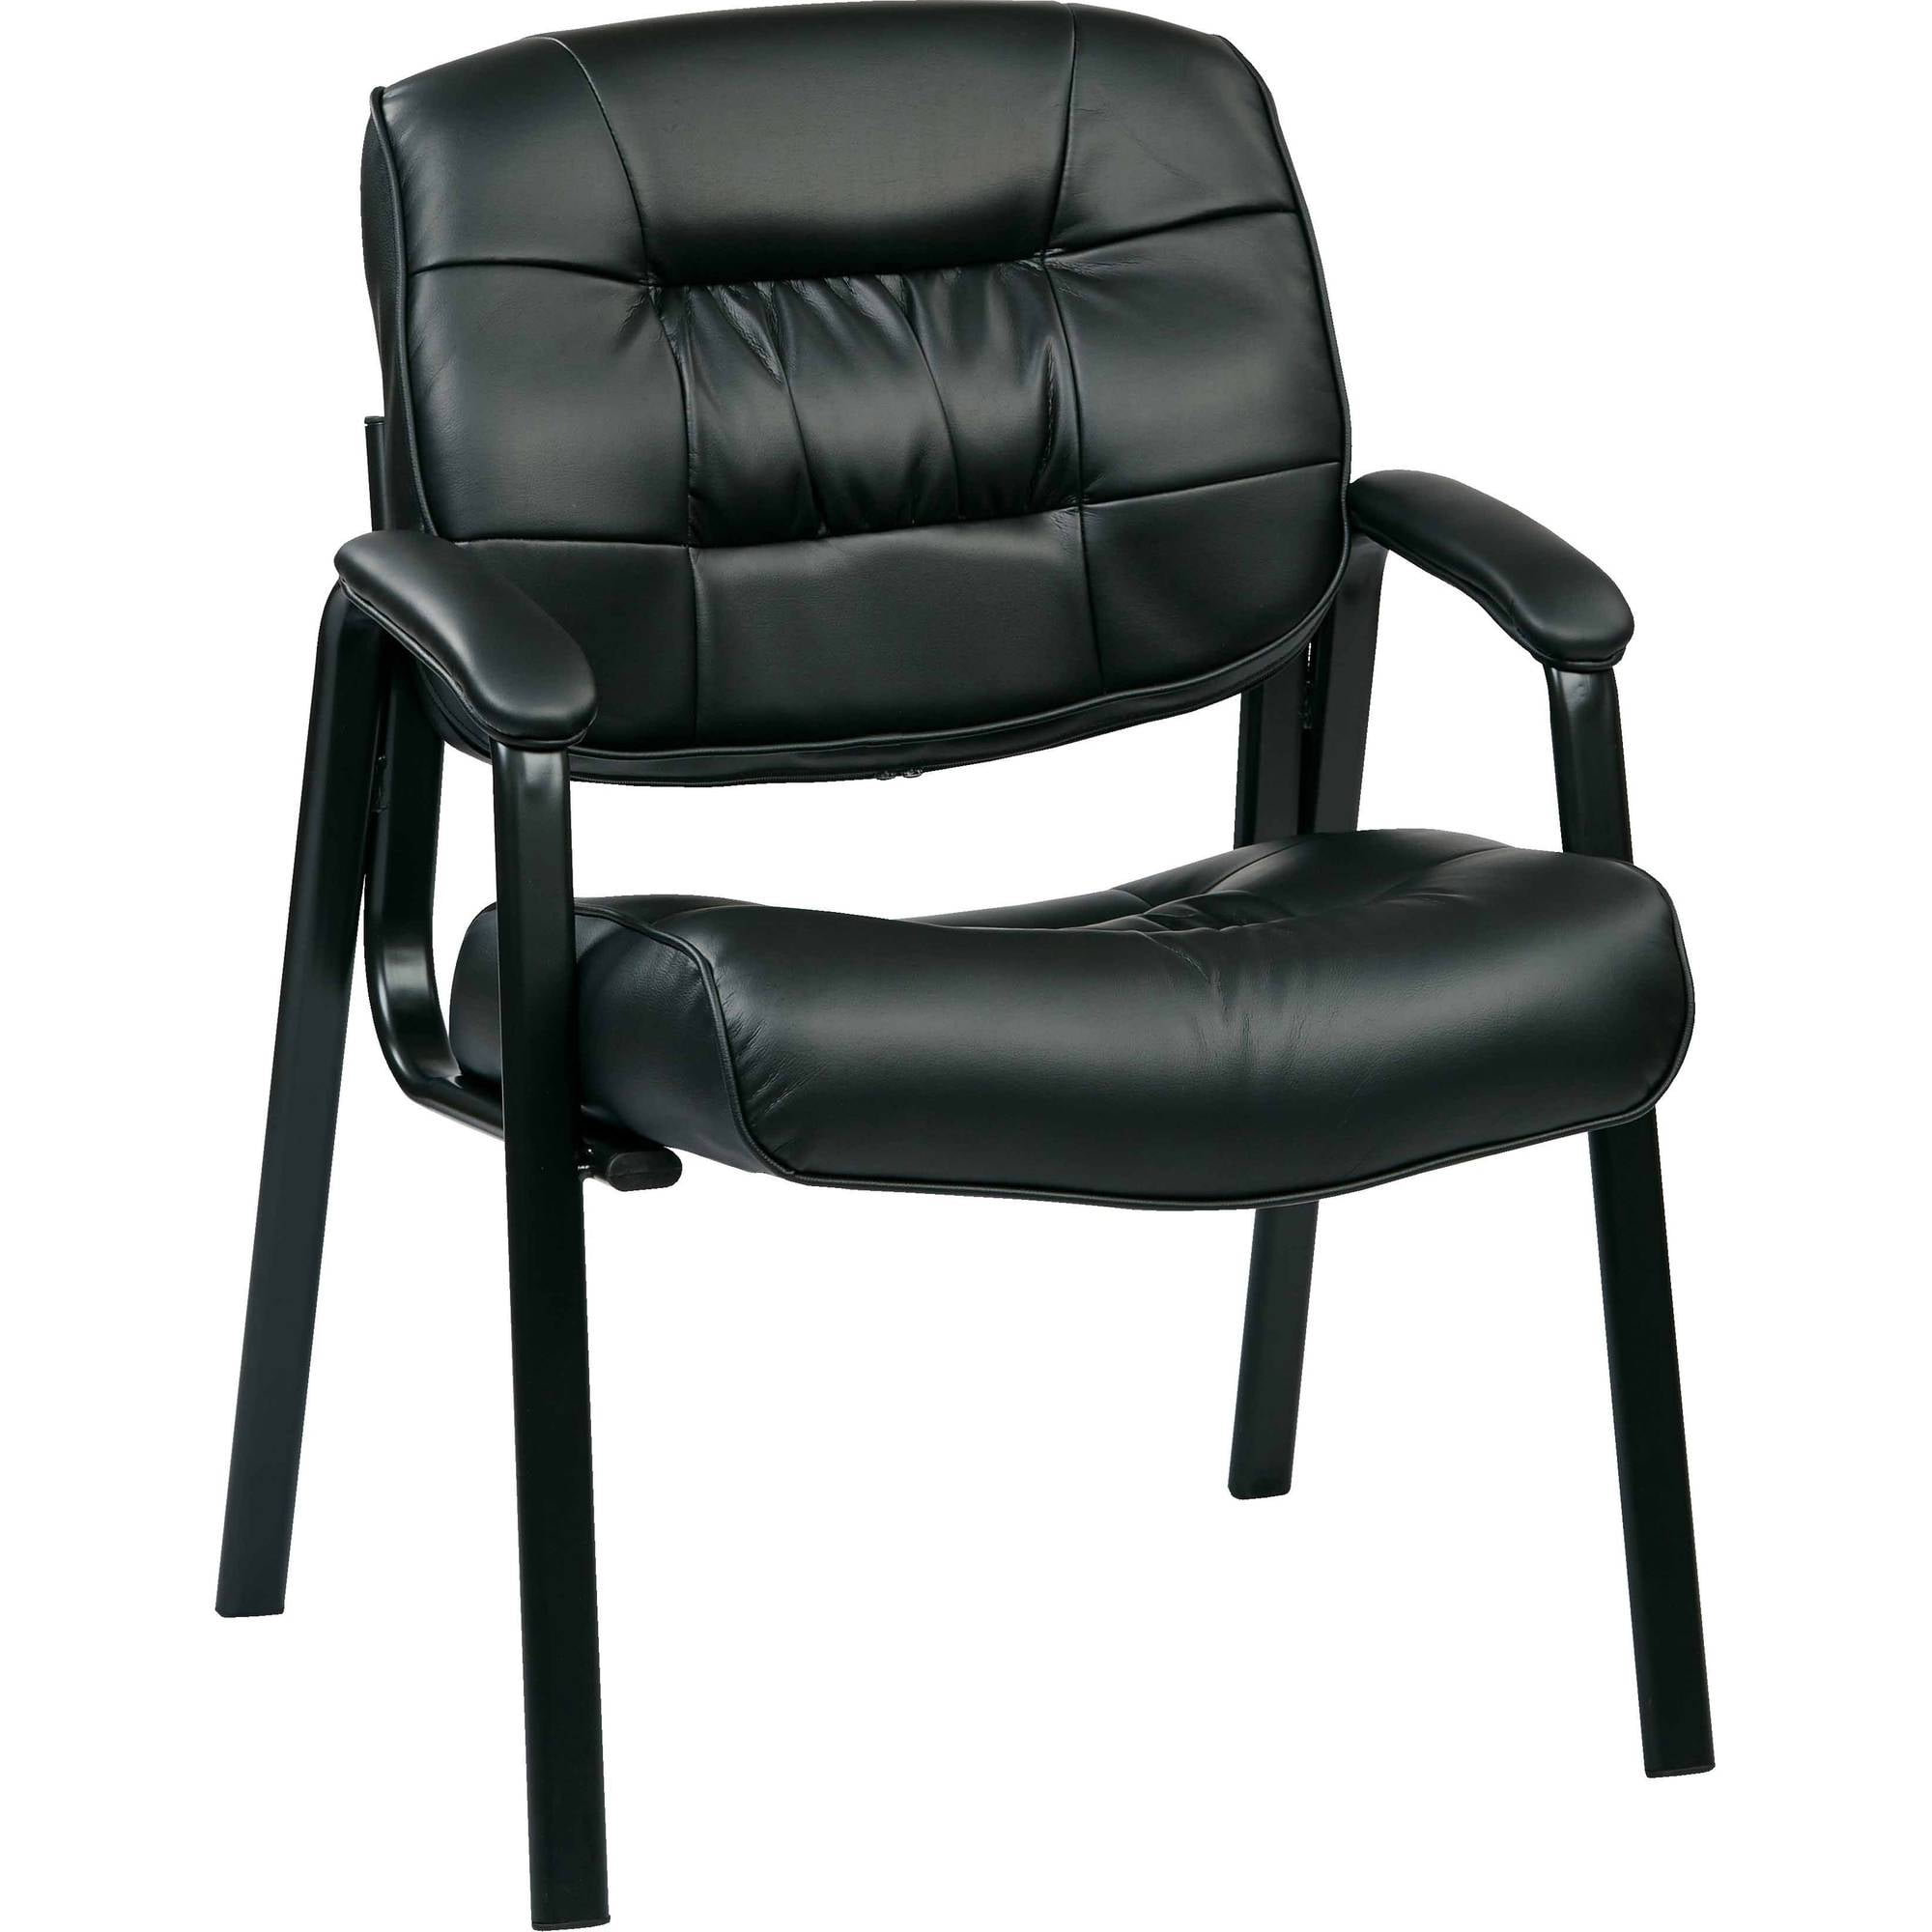 Bonded Leather Waiting Room & Reception Chair - Walmart.com